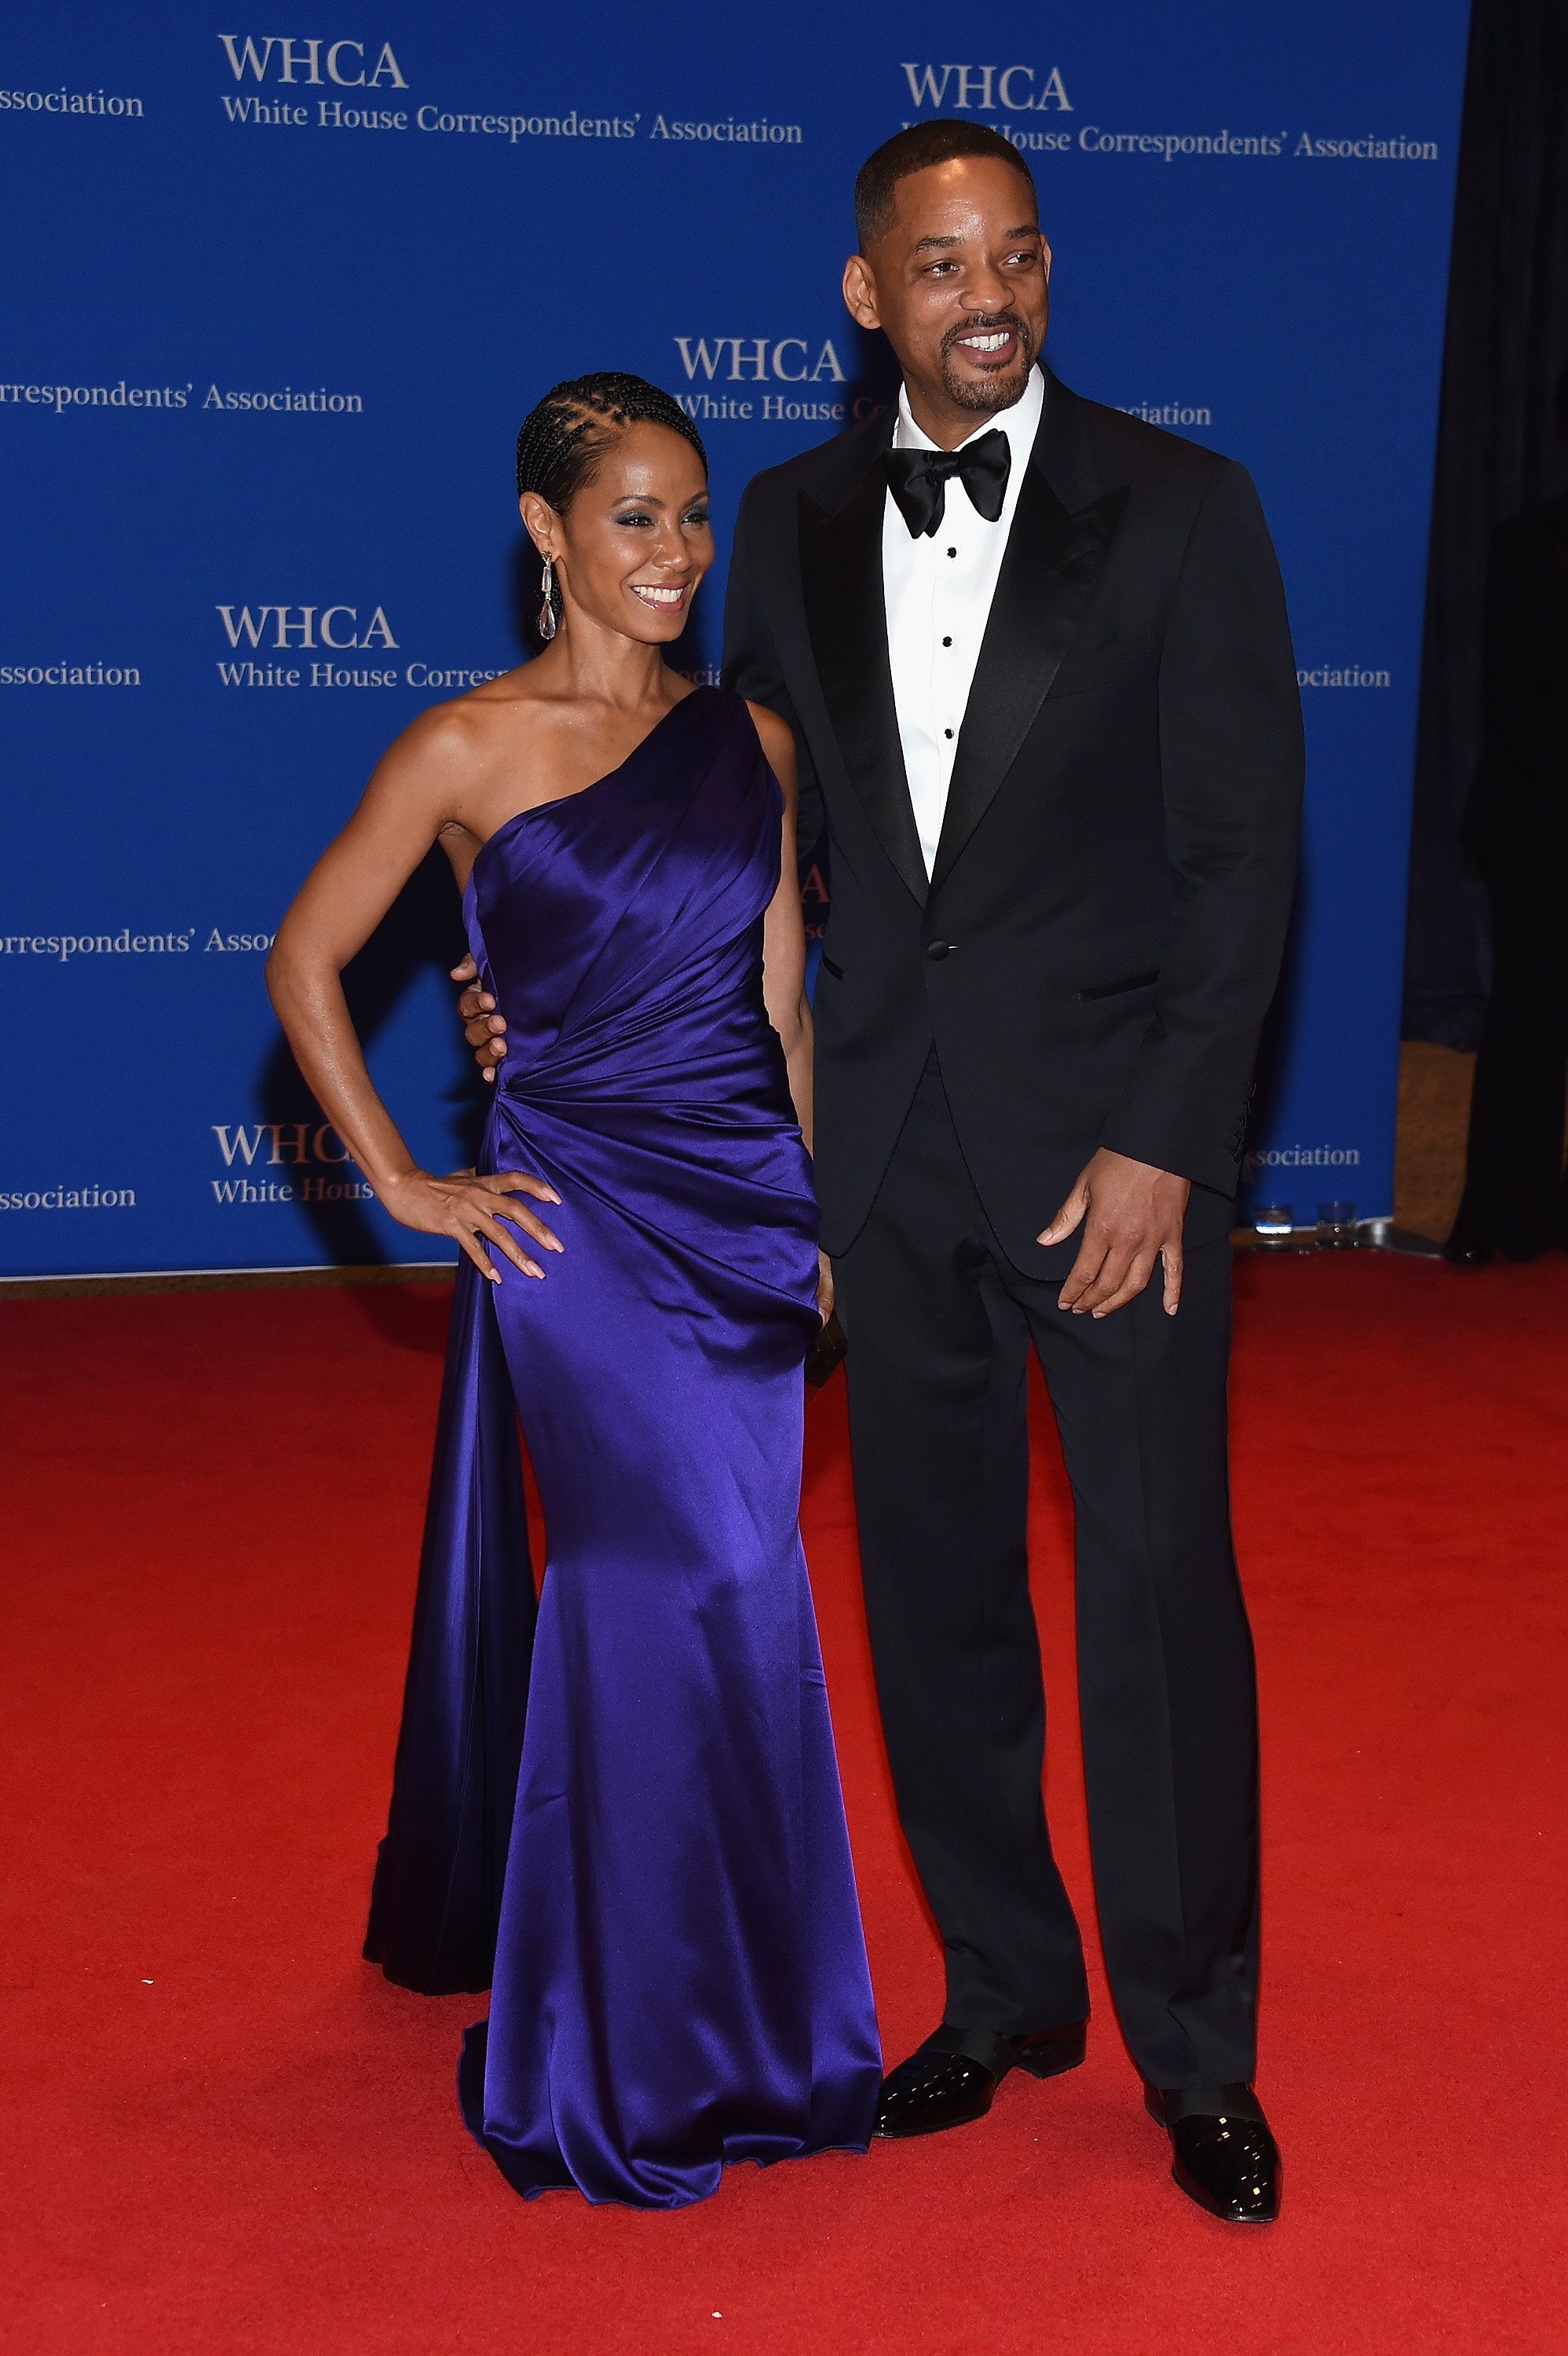 Actors Jada Pinkett Smith and Will Smith attend the White House Correspondents' Association Dinner at the Washington Hilton Hotel in Washington on April 30, 2016.